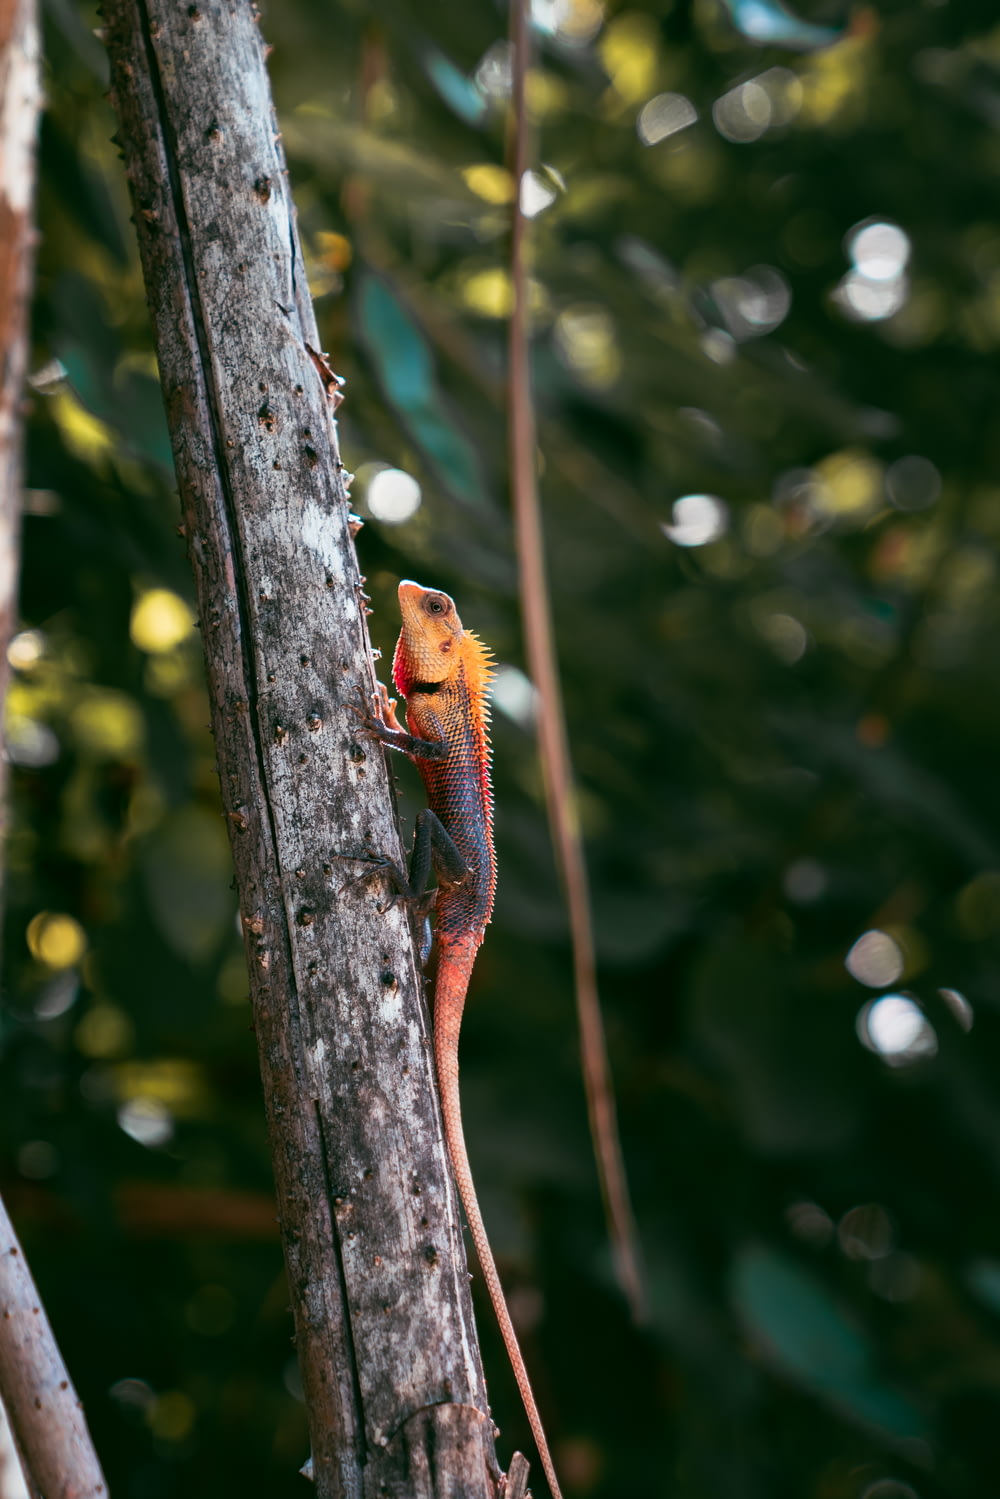 a small orange frog on a tree branch